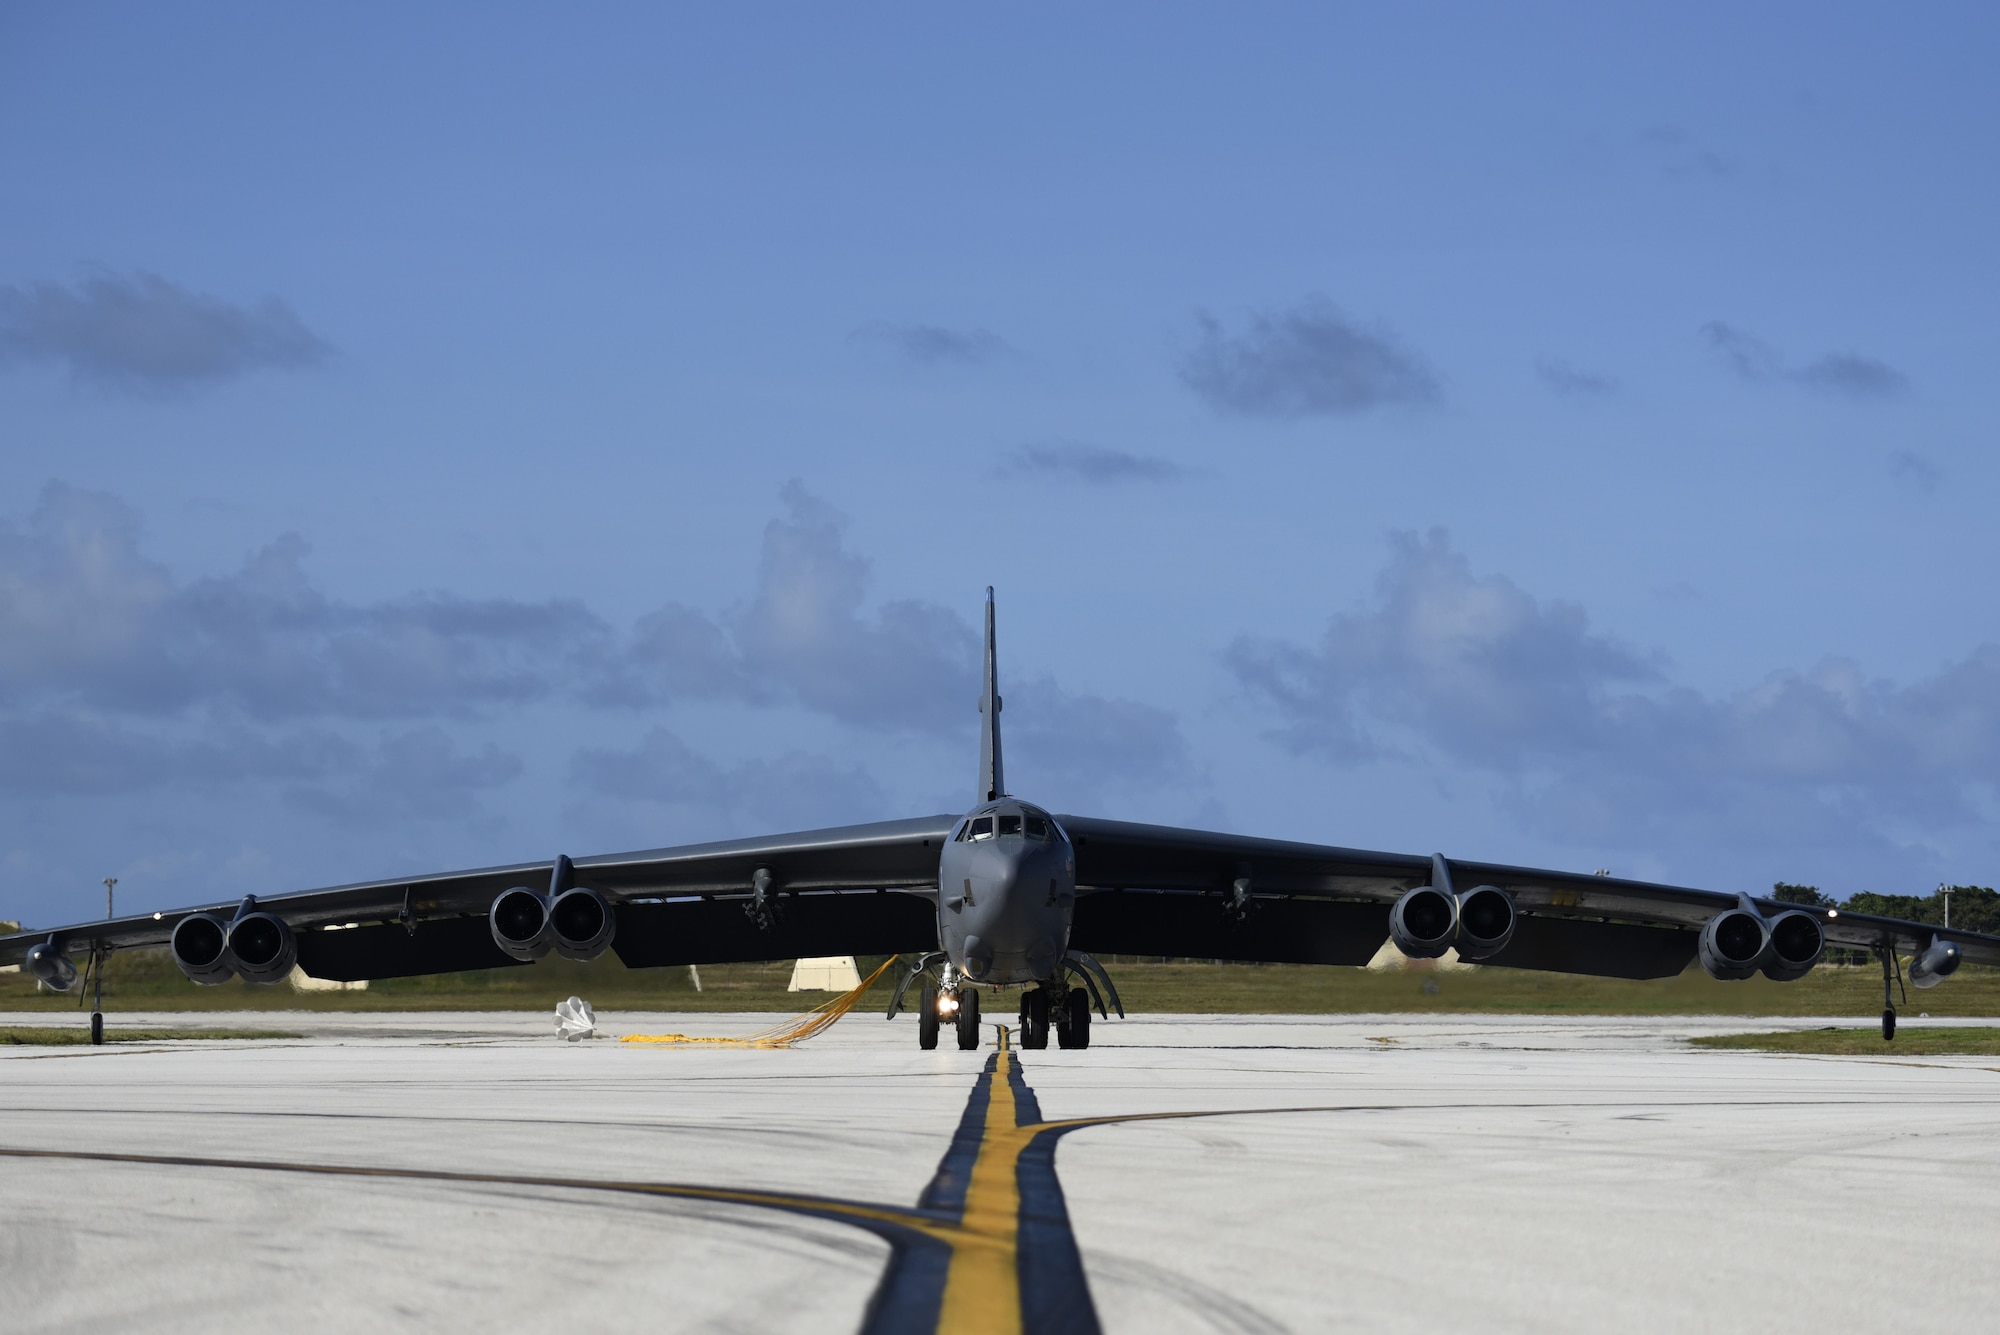 A U.S. Air Force B-52H Stratofortress bomber taxis after landing at Andersen Air Force Base (AFB), Guam, Jan. 16, 2018.